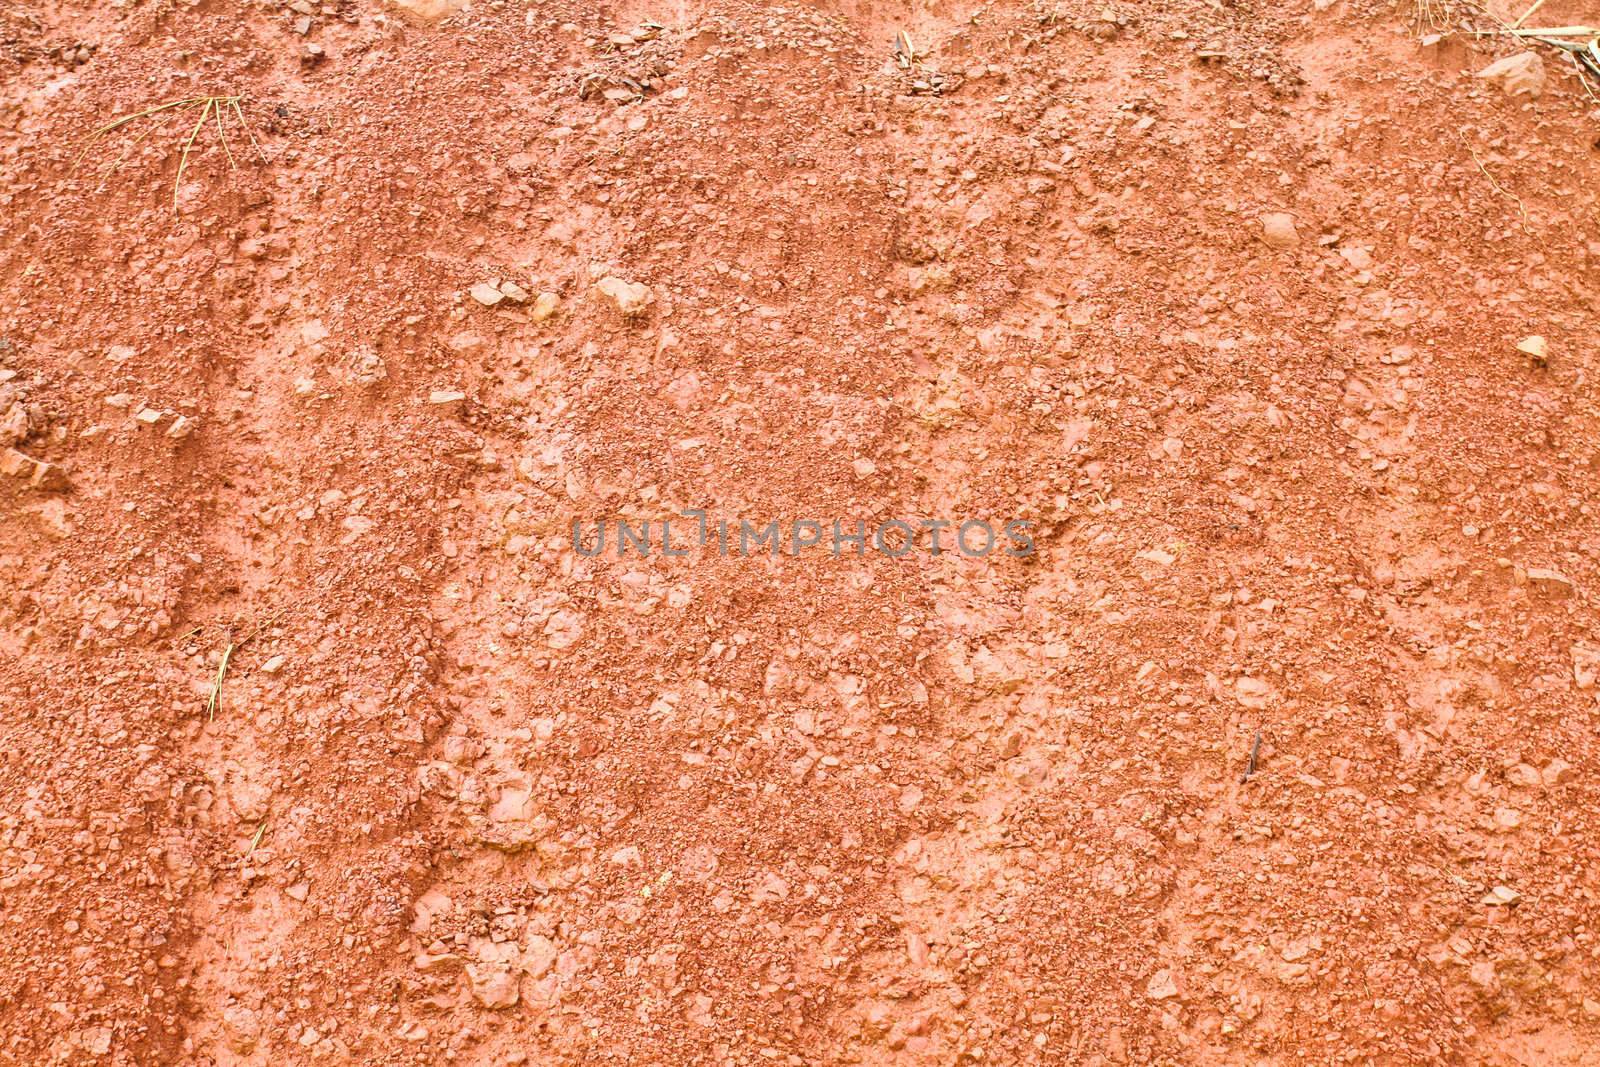 Red soil texture and dried plant